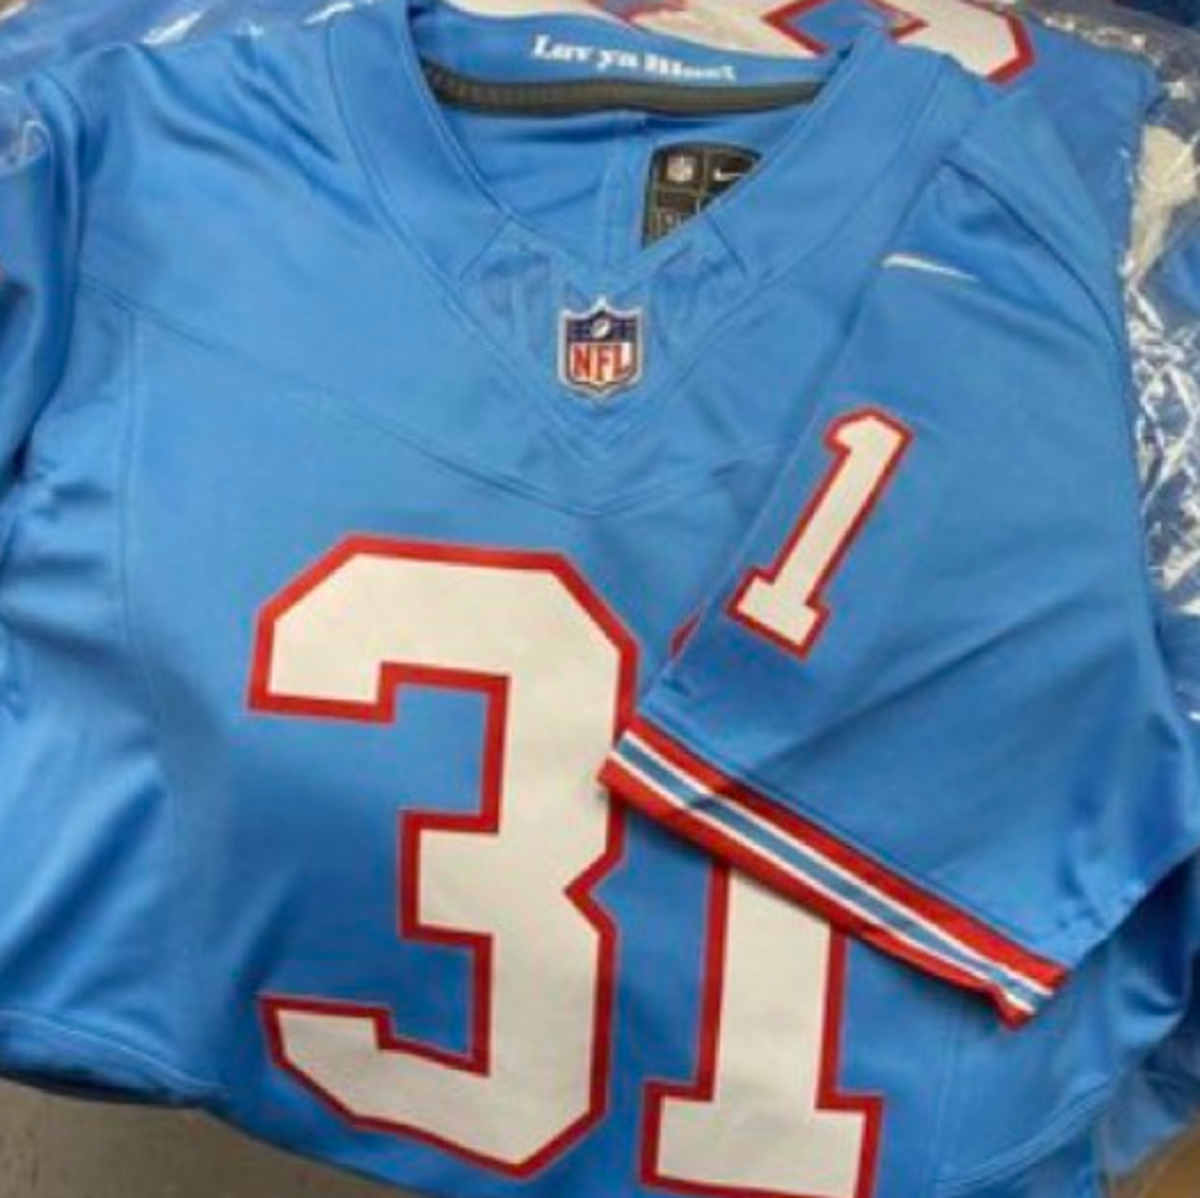 Tennessee Titans unveil throwback Oilers uniforms 